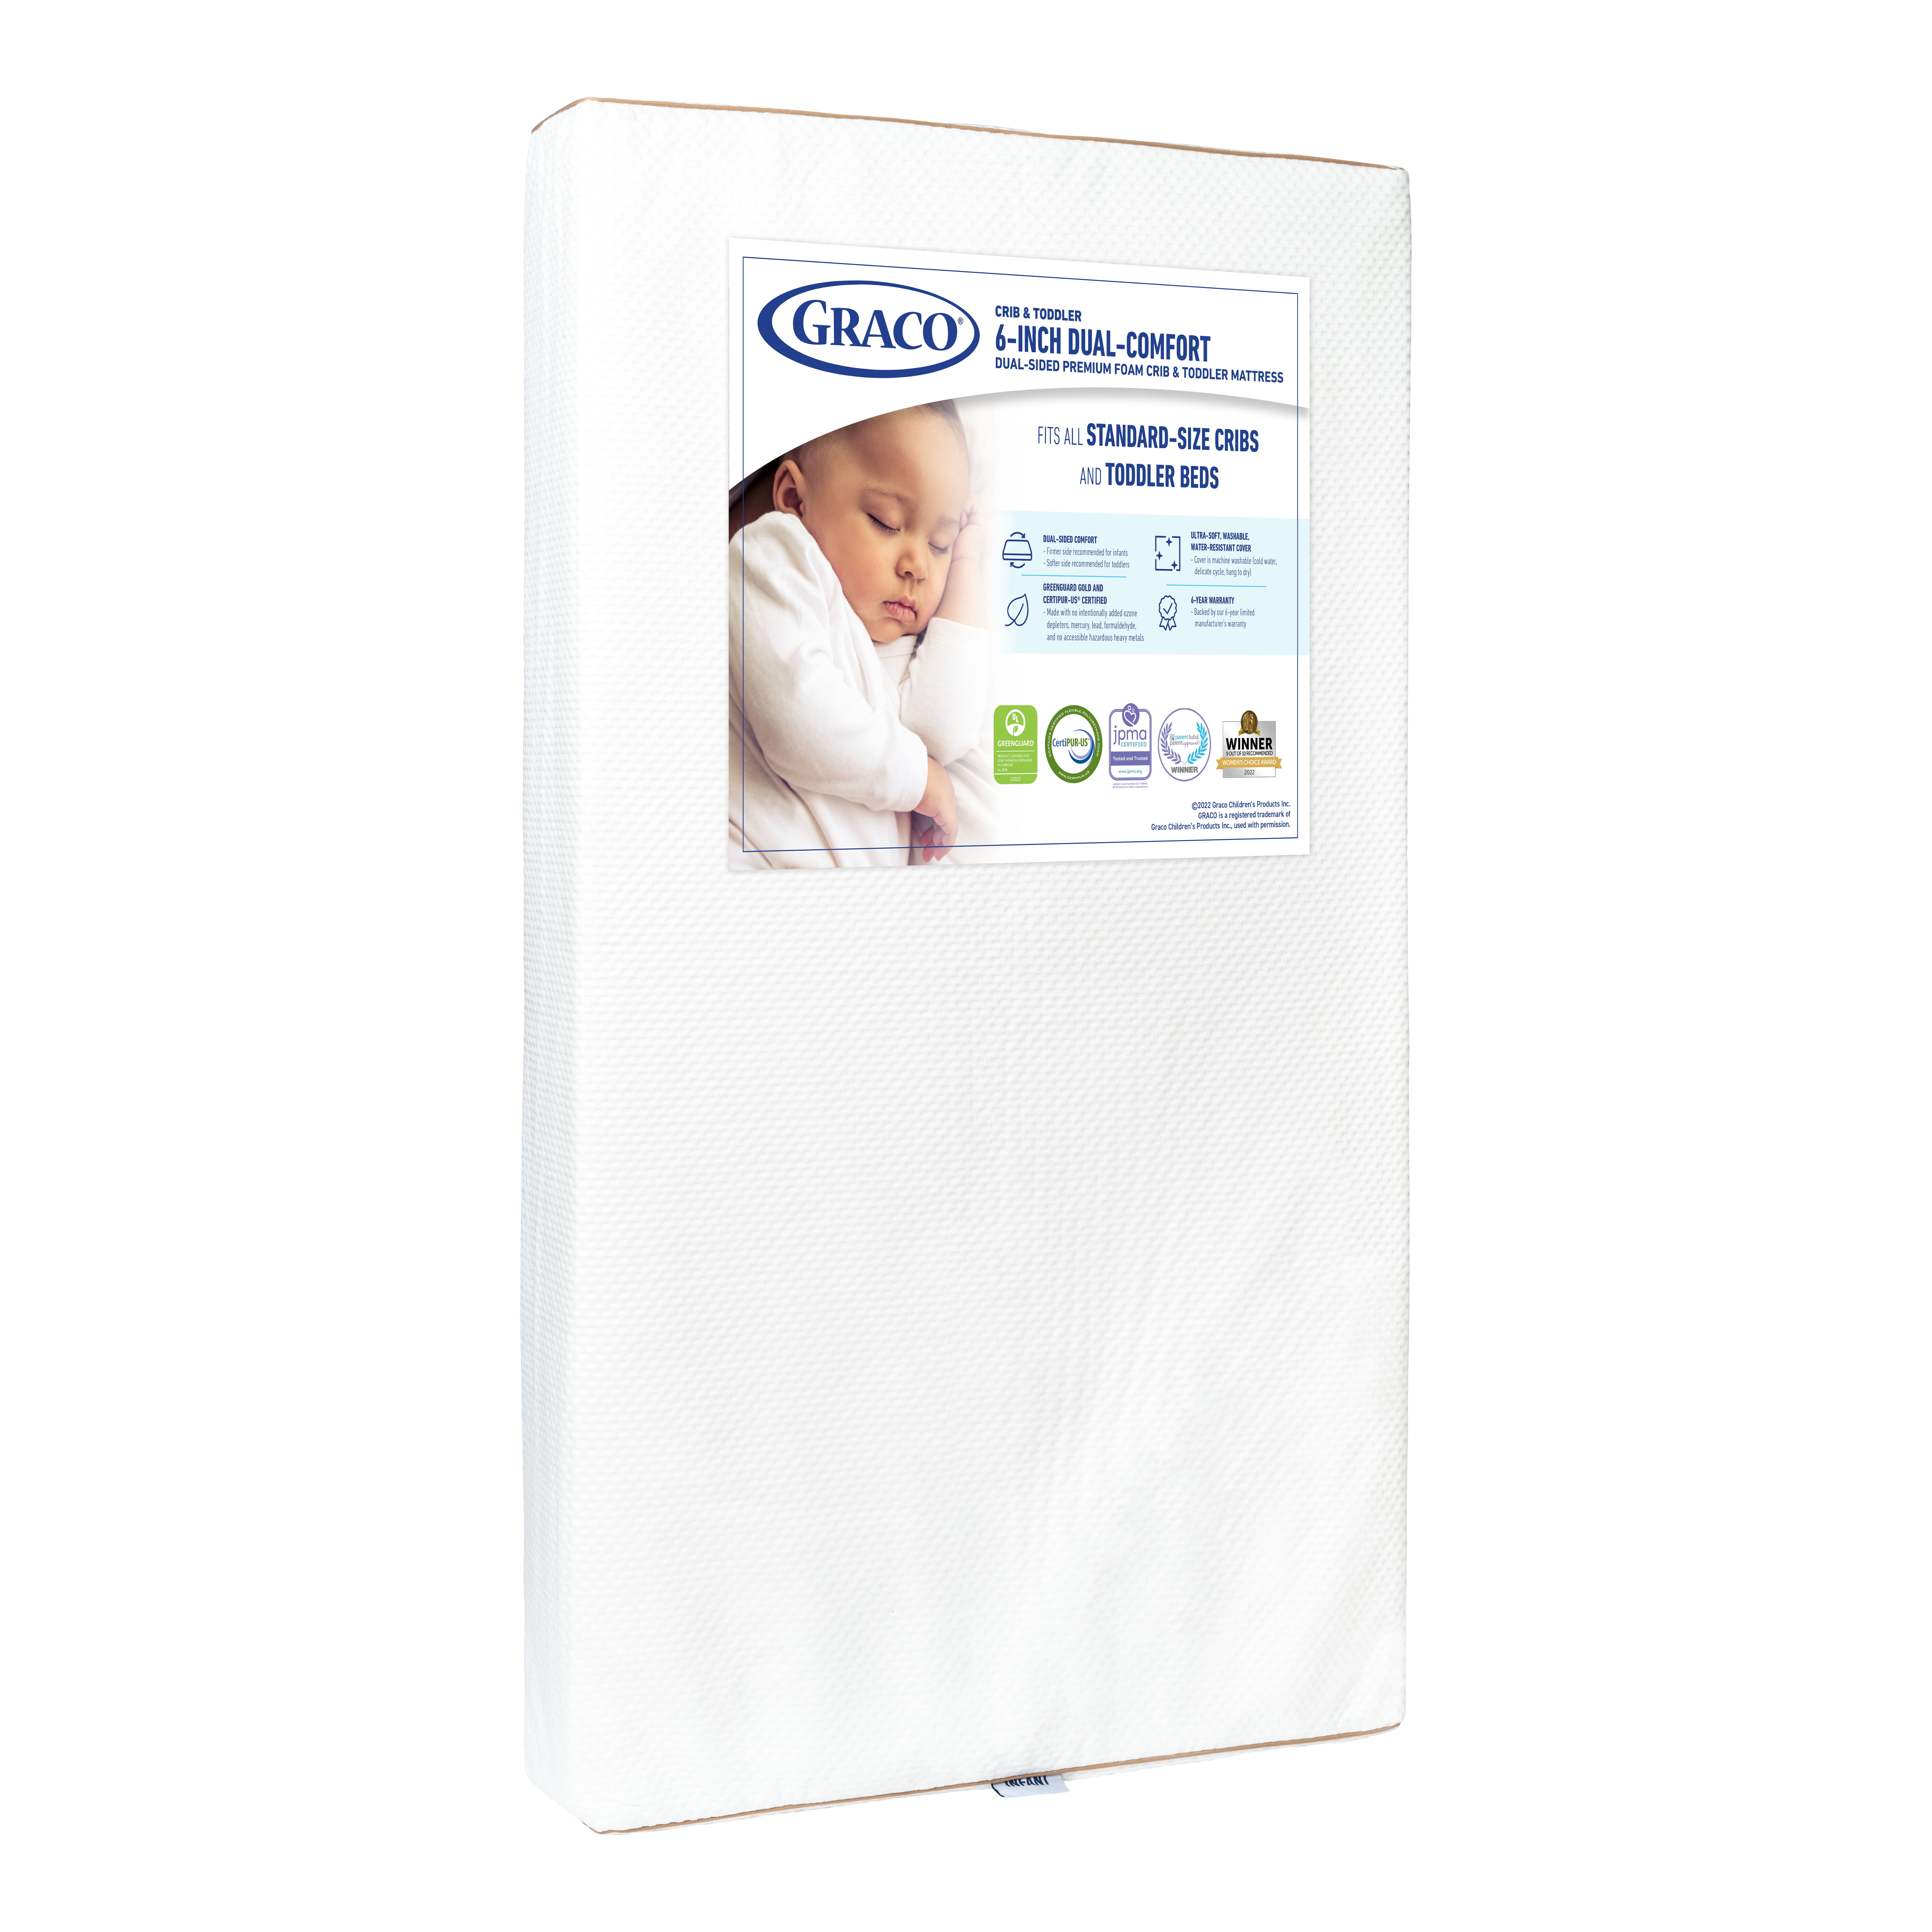 Graco Dual-Comfort 6-inch Foam Crib and Toddler Bed Mattress 